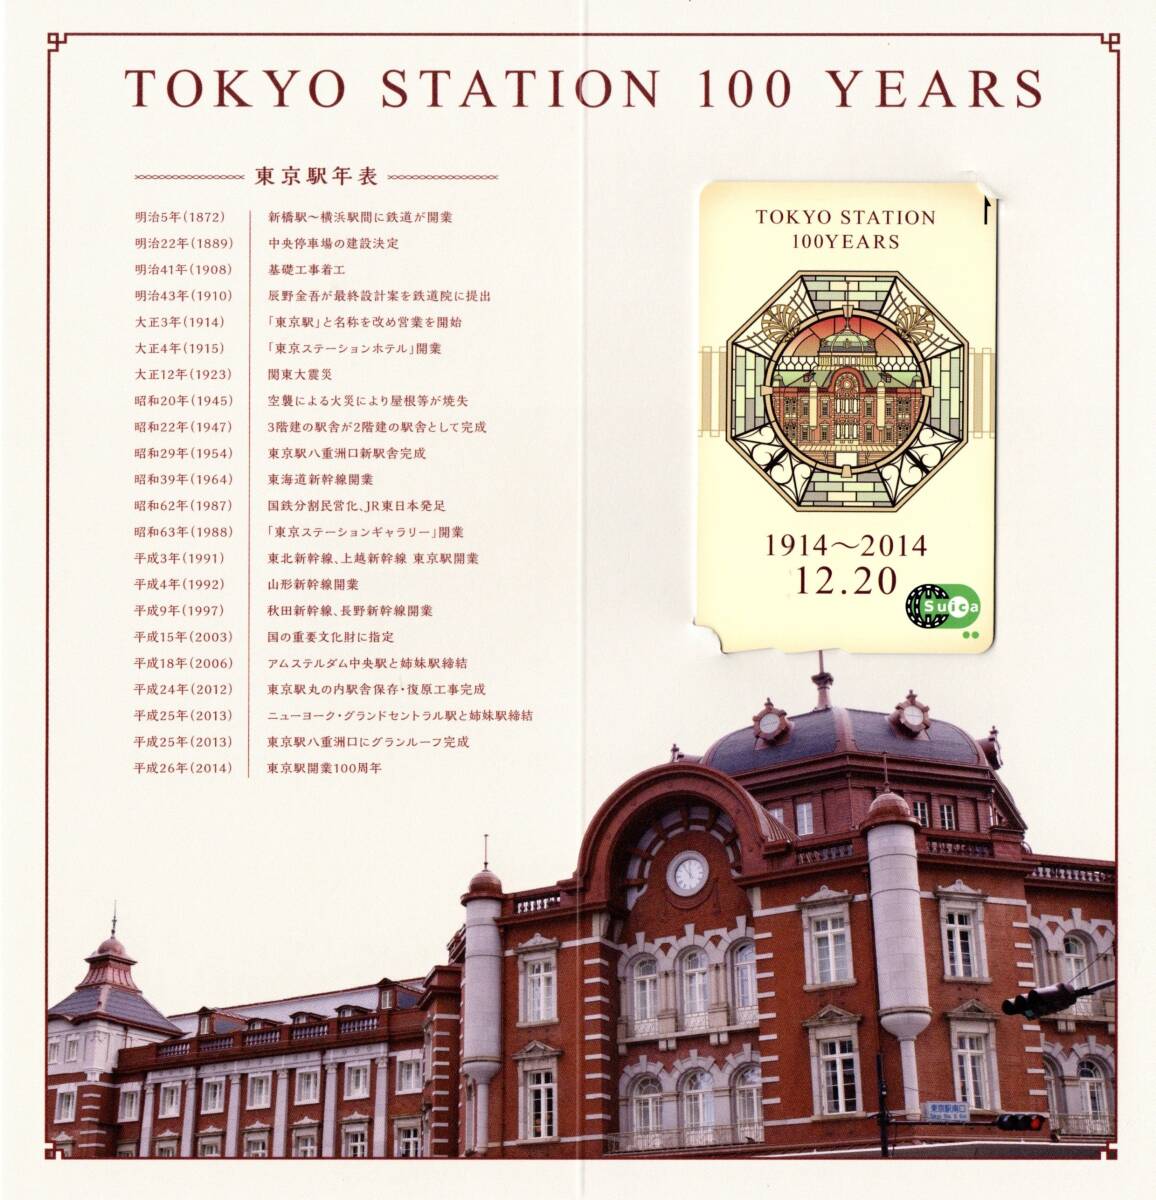  Tokyo station opening 100 anniversary commemoration Suica